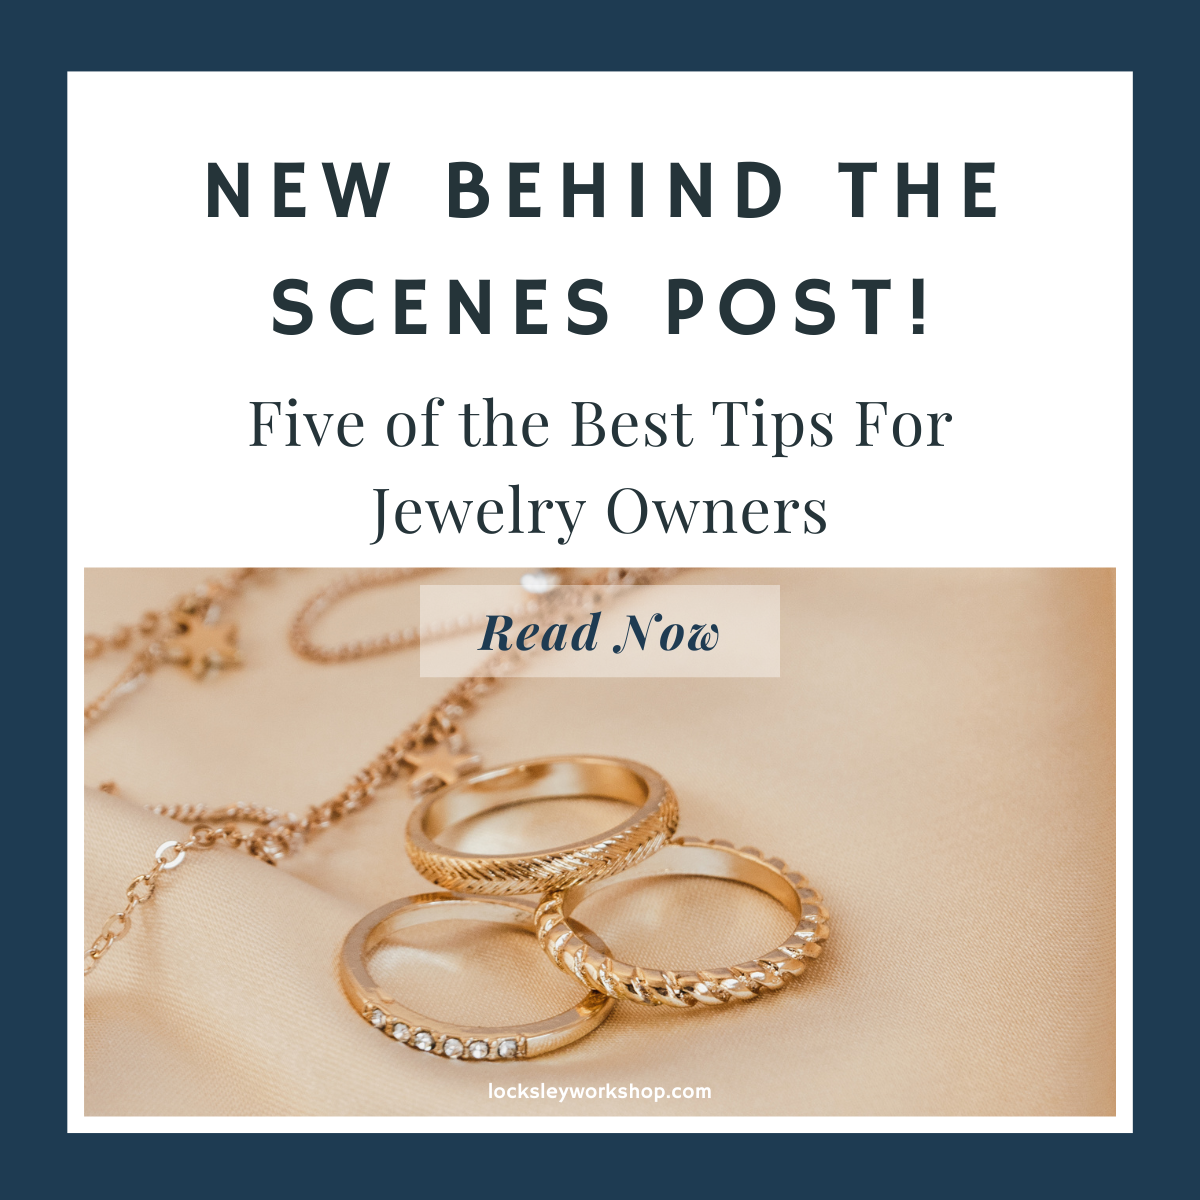 5 of the Best Tips For Jewelry Owners